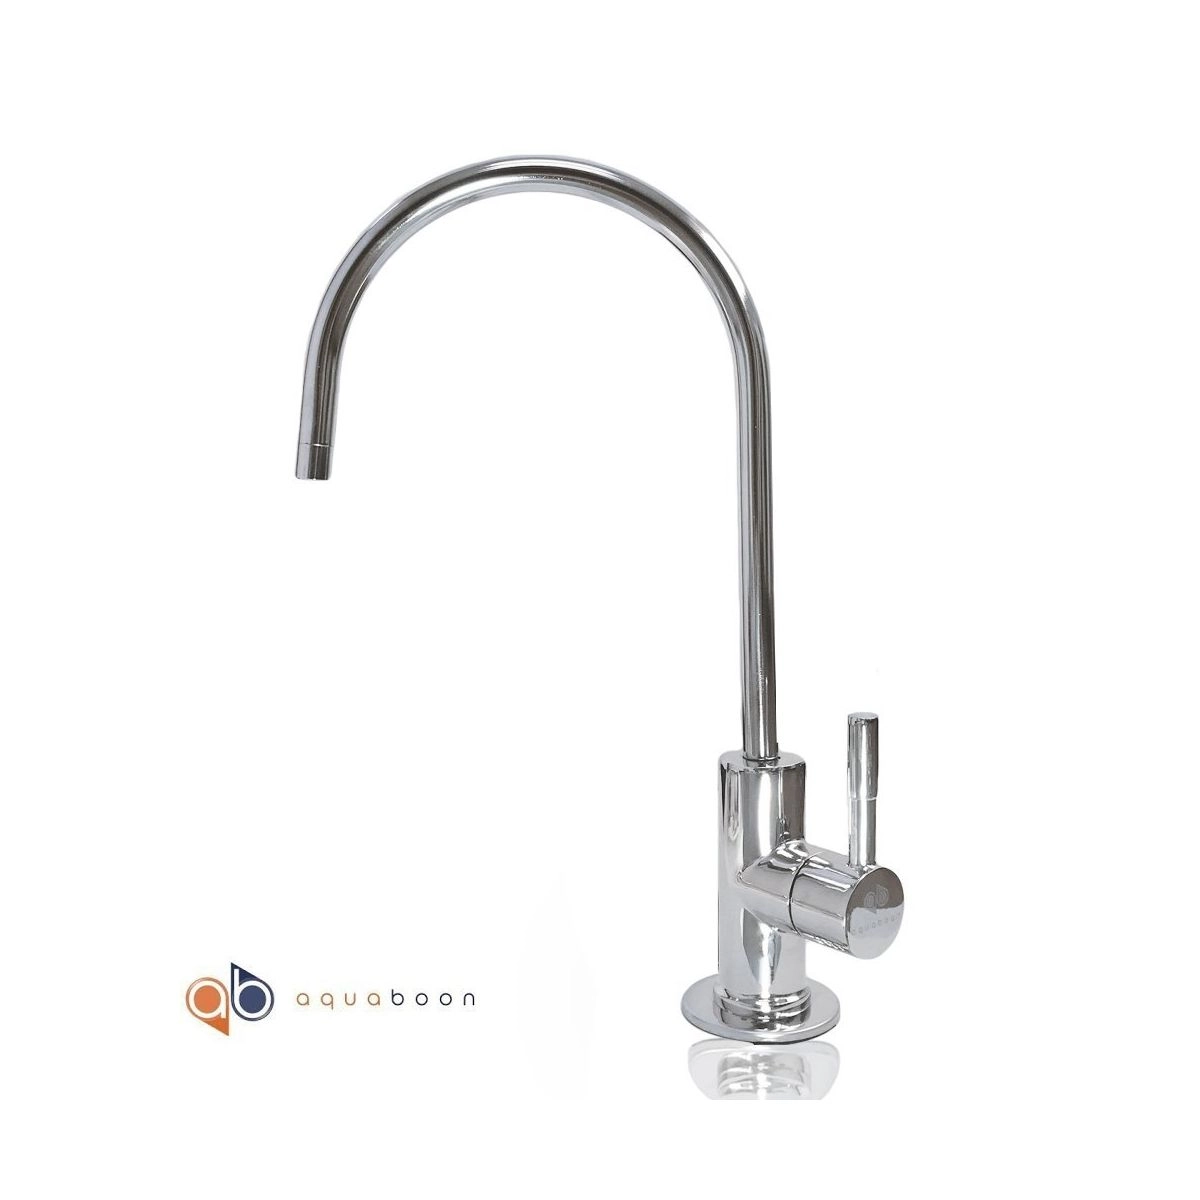 Aquaboon Kitchen 1 Handle Control Chrome Finished RO faucet, Drinking Water Faucet